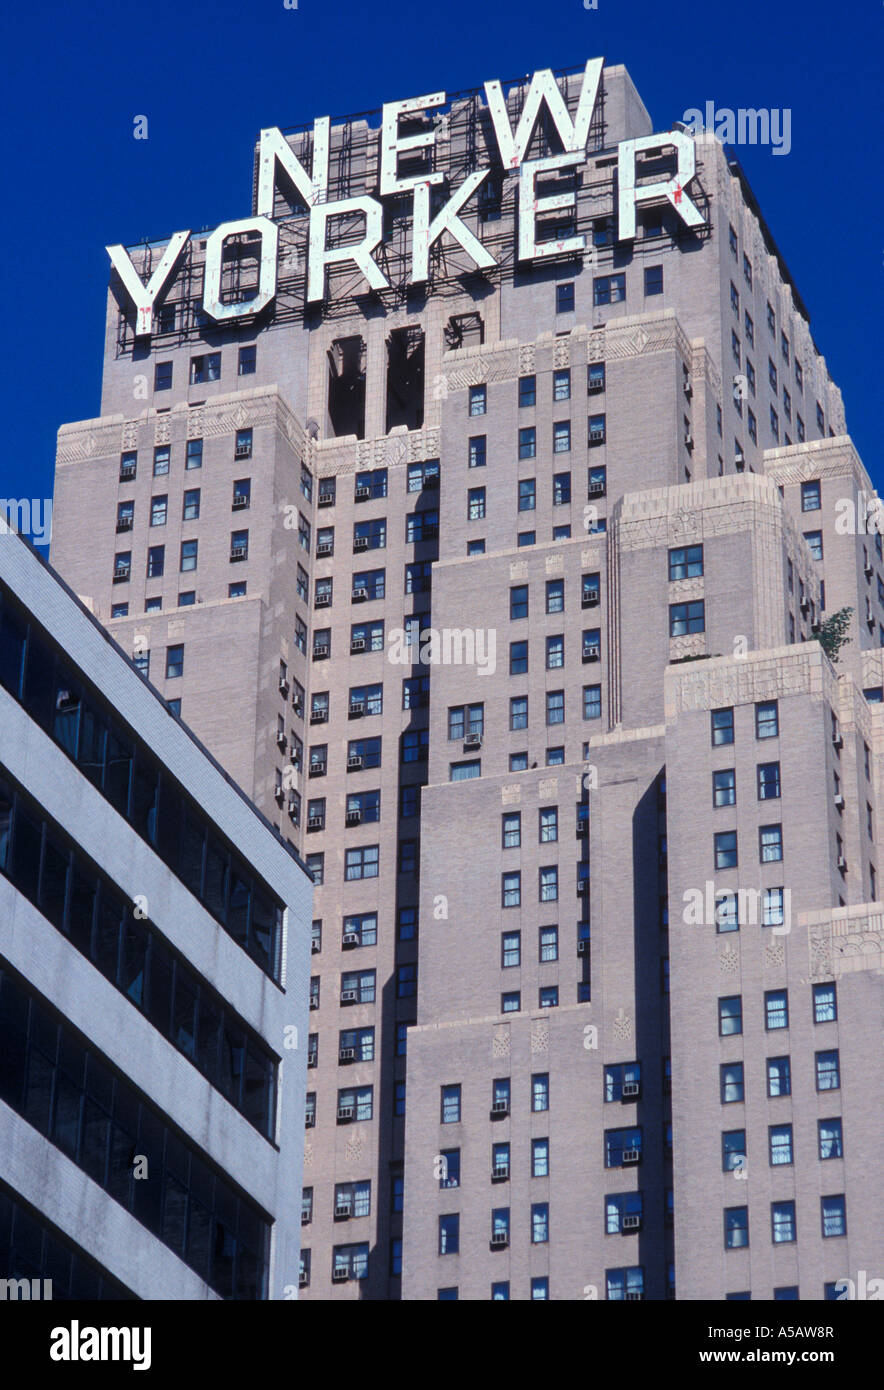 Le New Yorker Building New York nord Banque D'Images